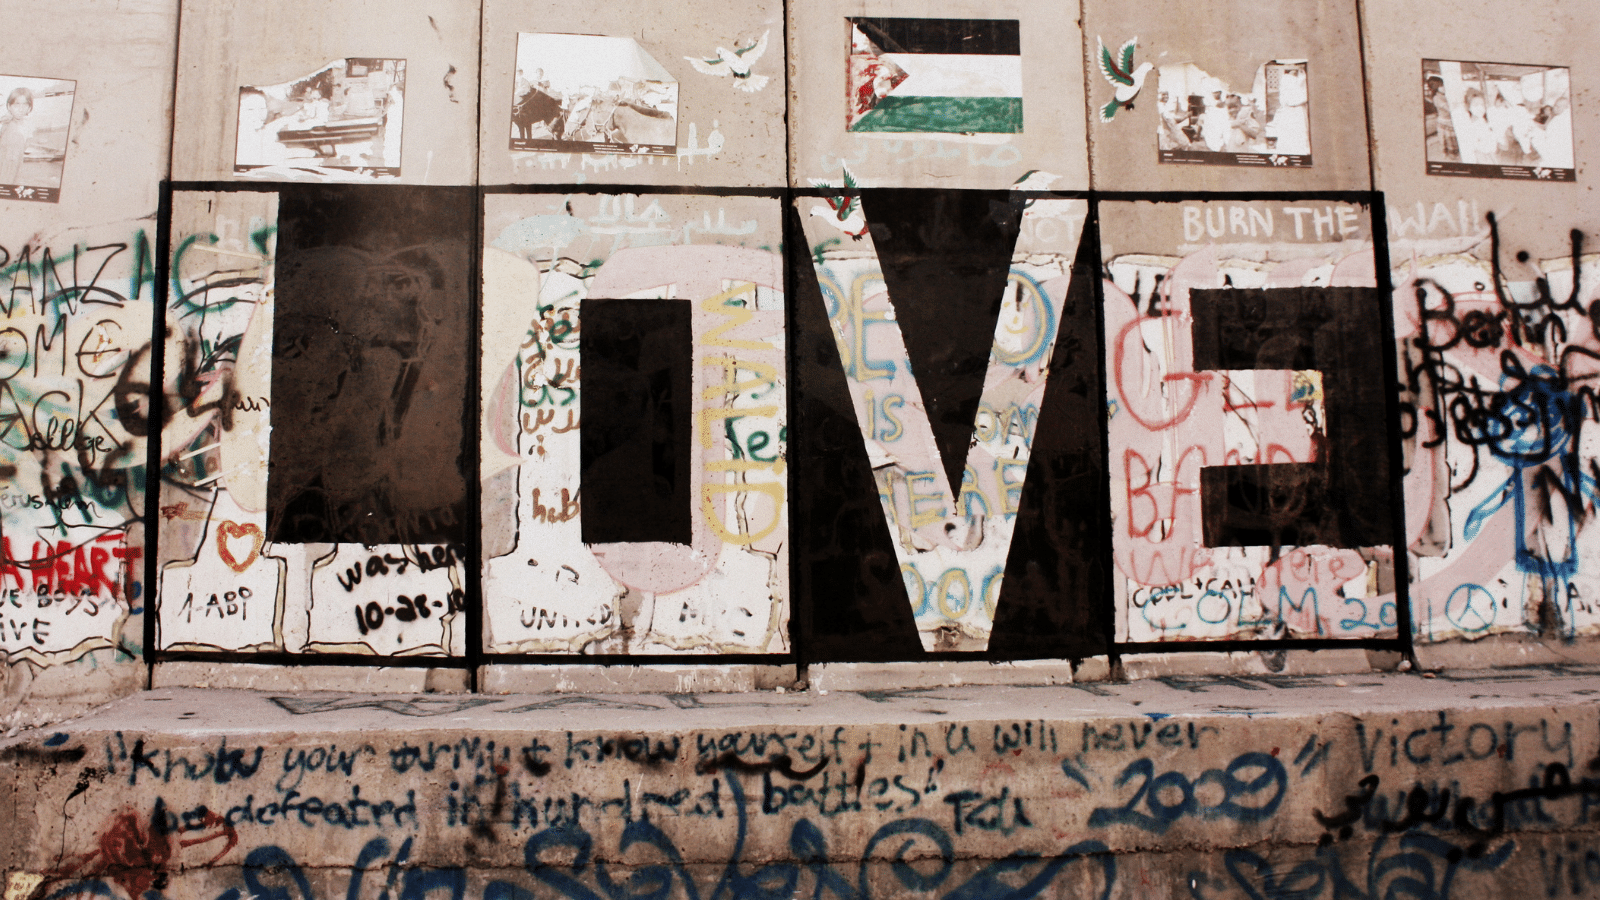 The word "love" graffitied a wall, with other writing all around it.